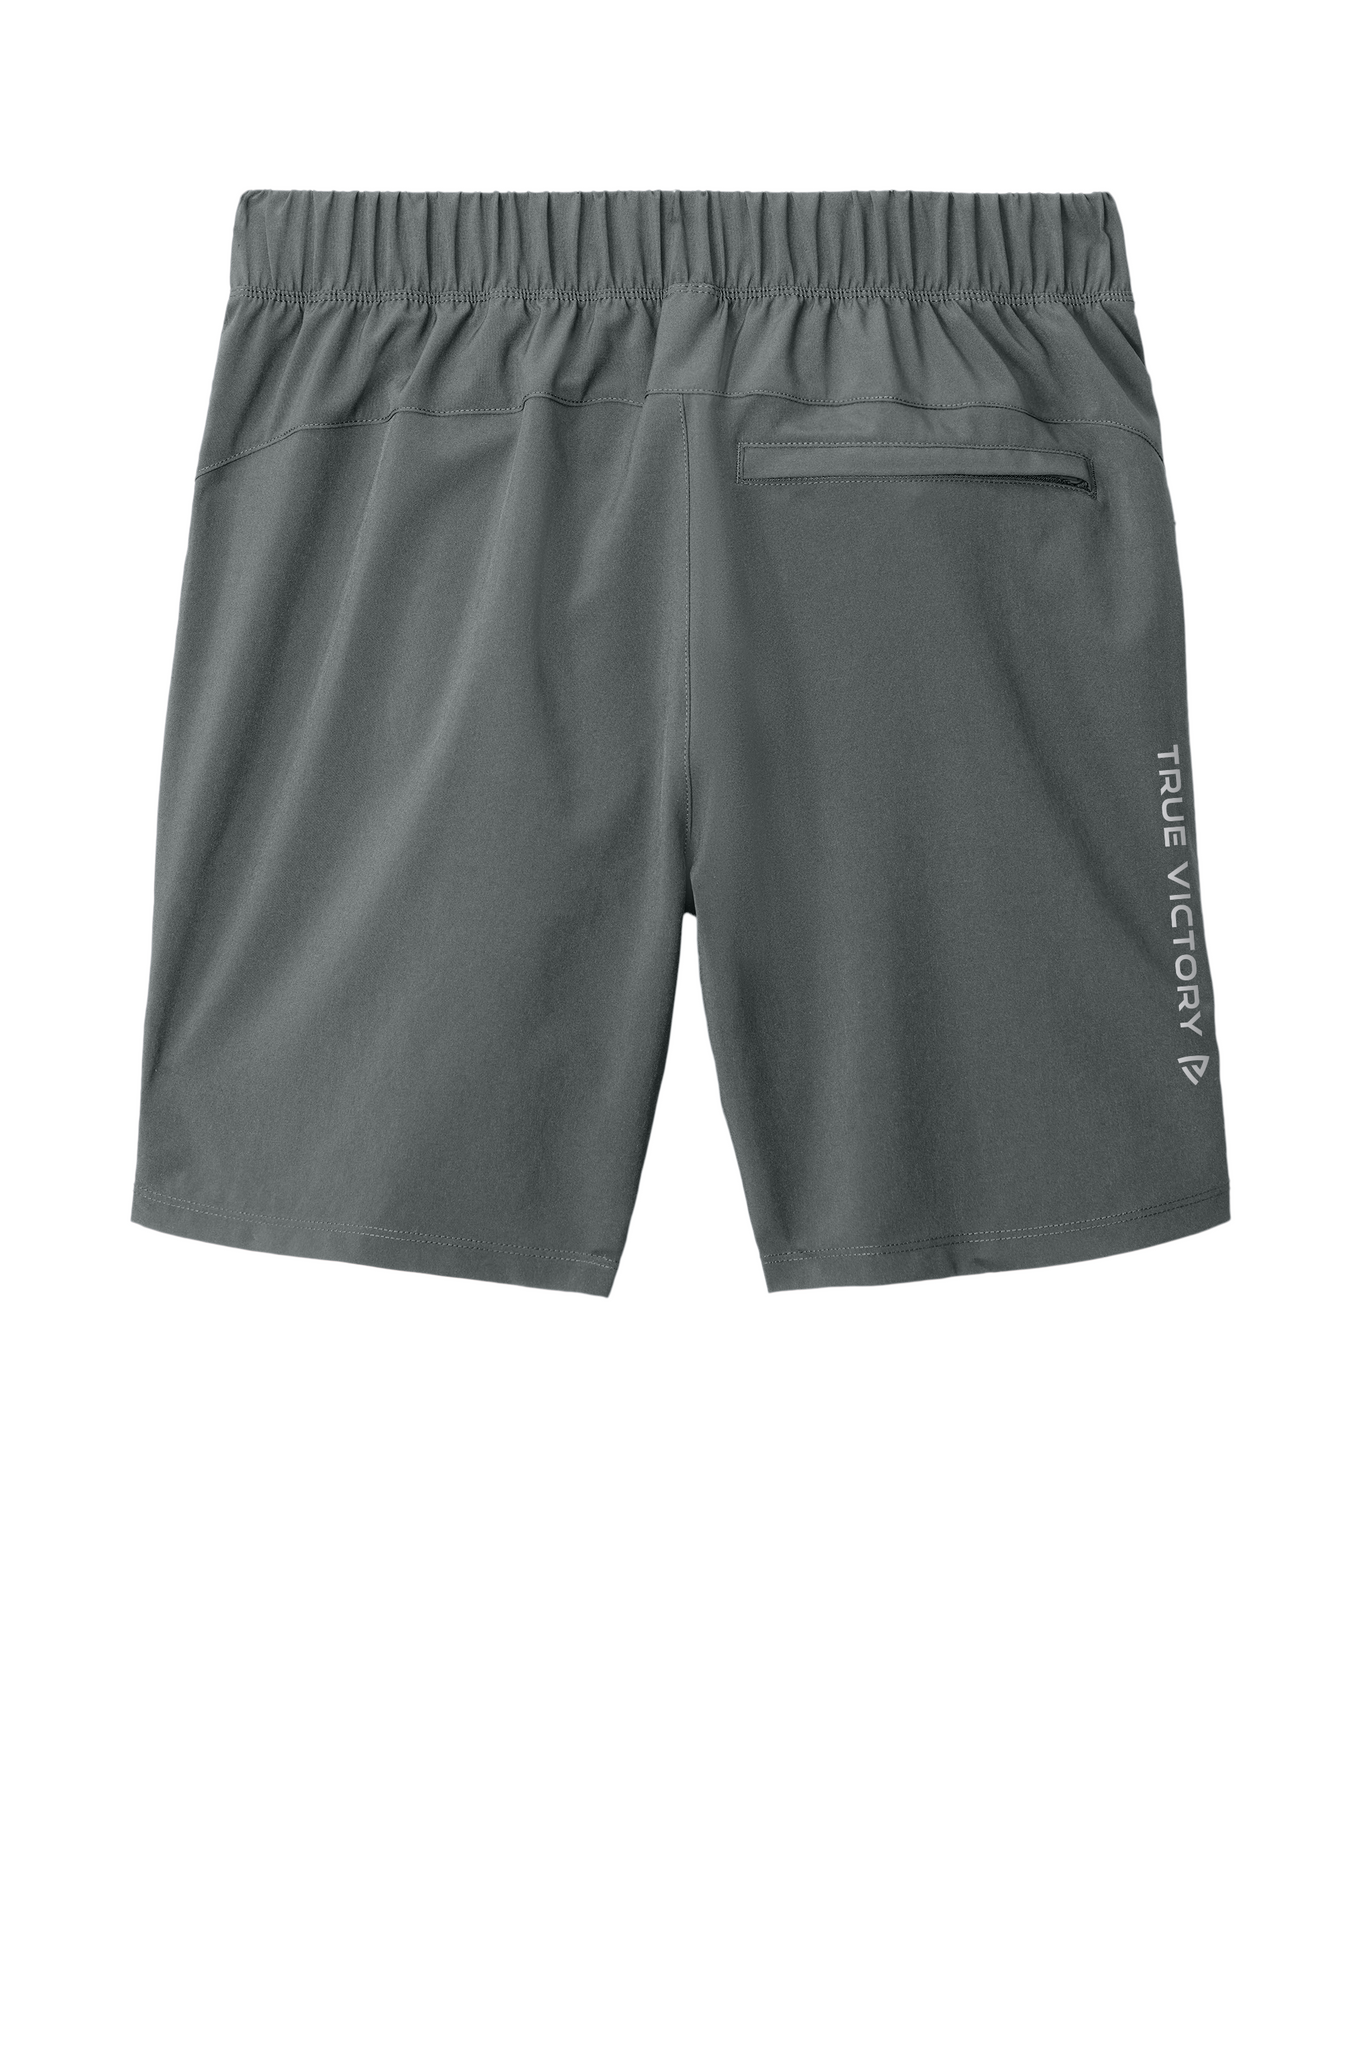 Victorious 7 Performance Shorts